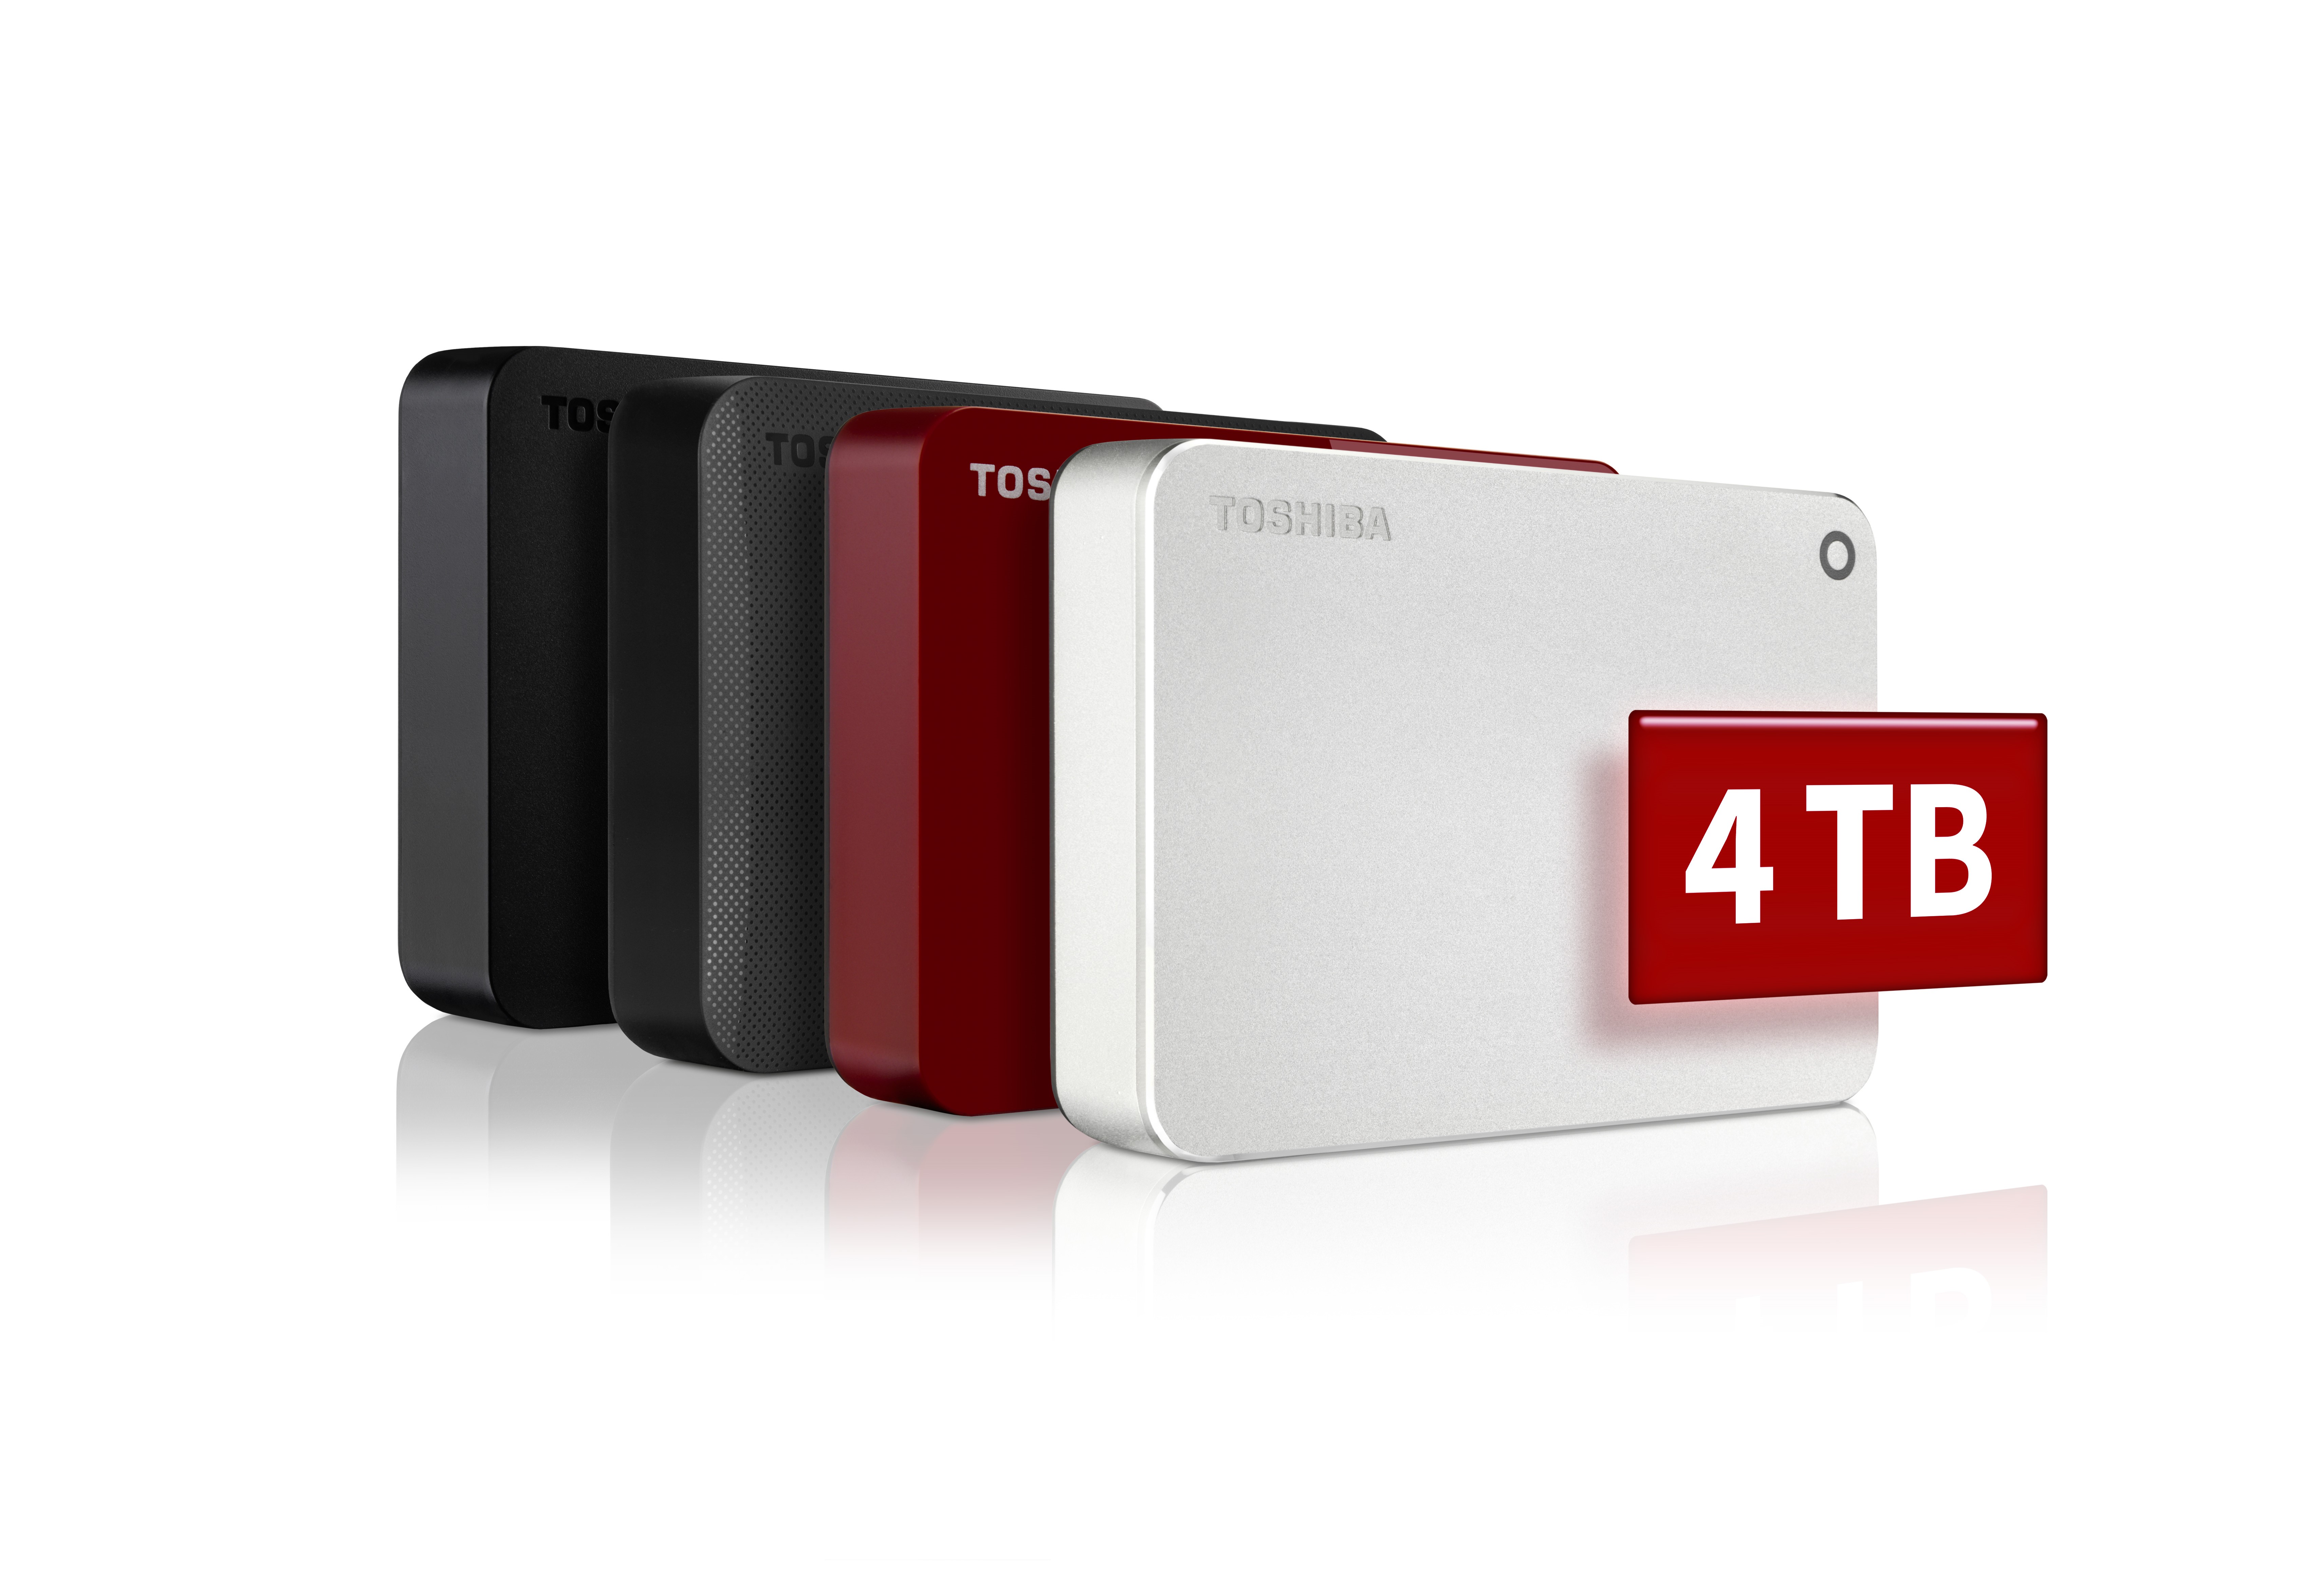 Toshiba adds new 4TB CANVIO Portable Hard Drive models for safe 